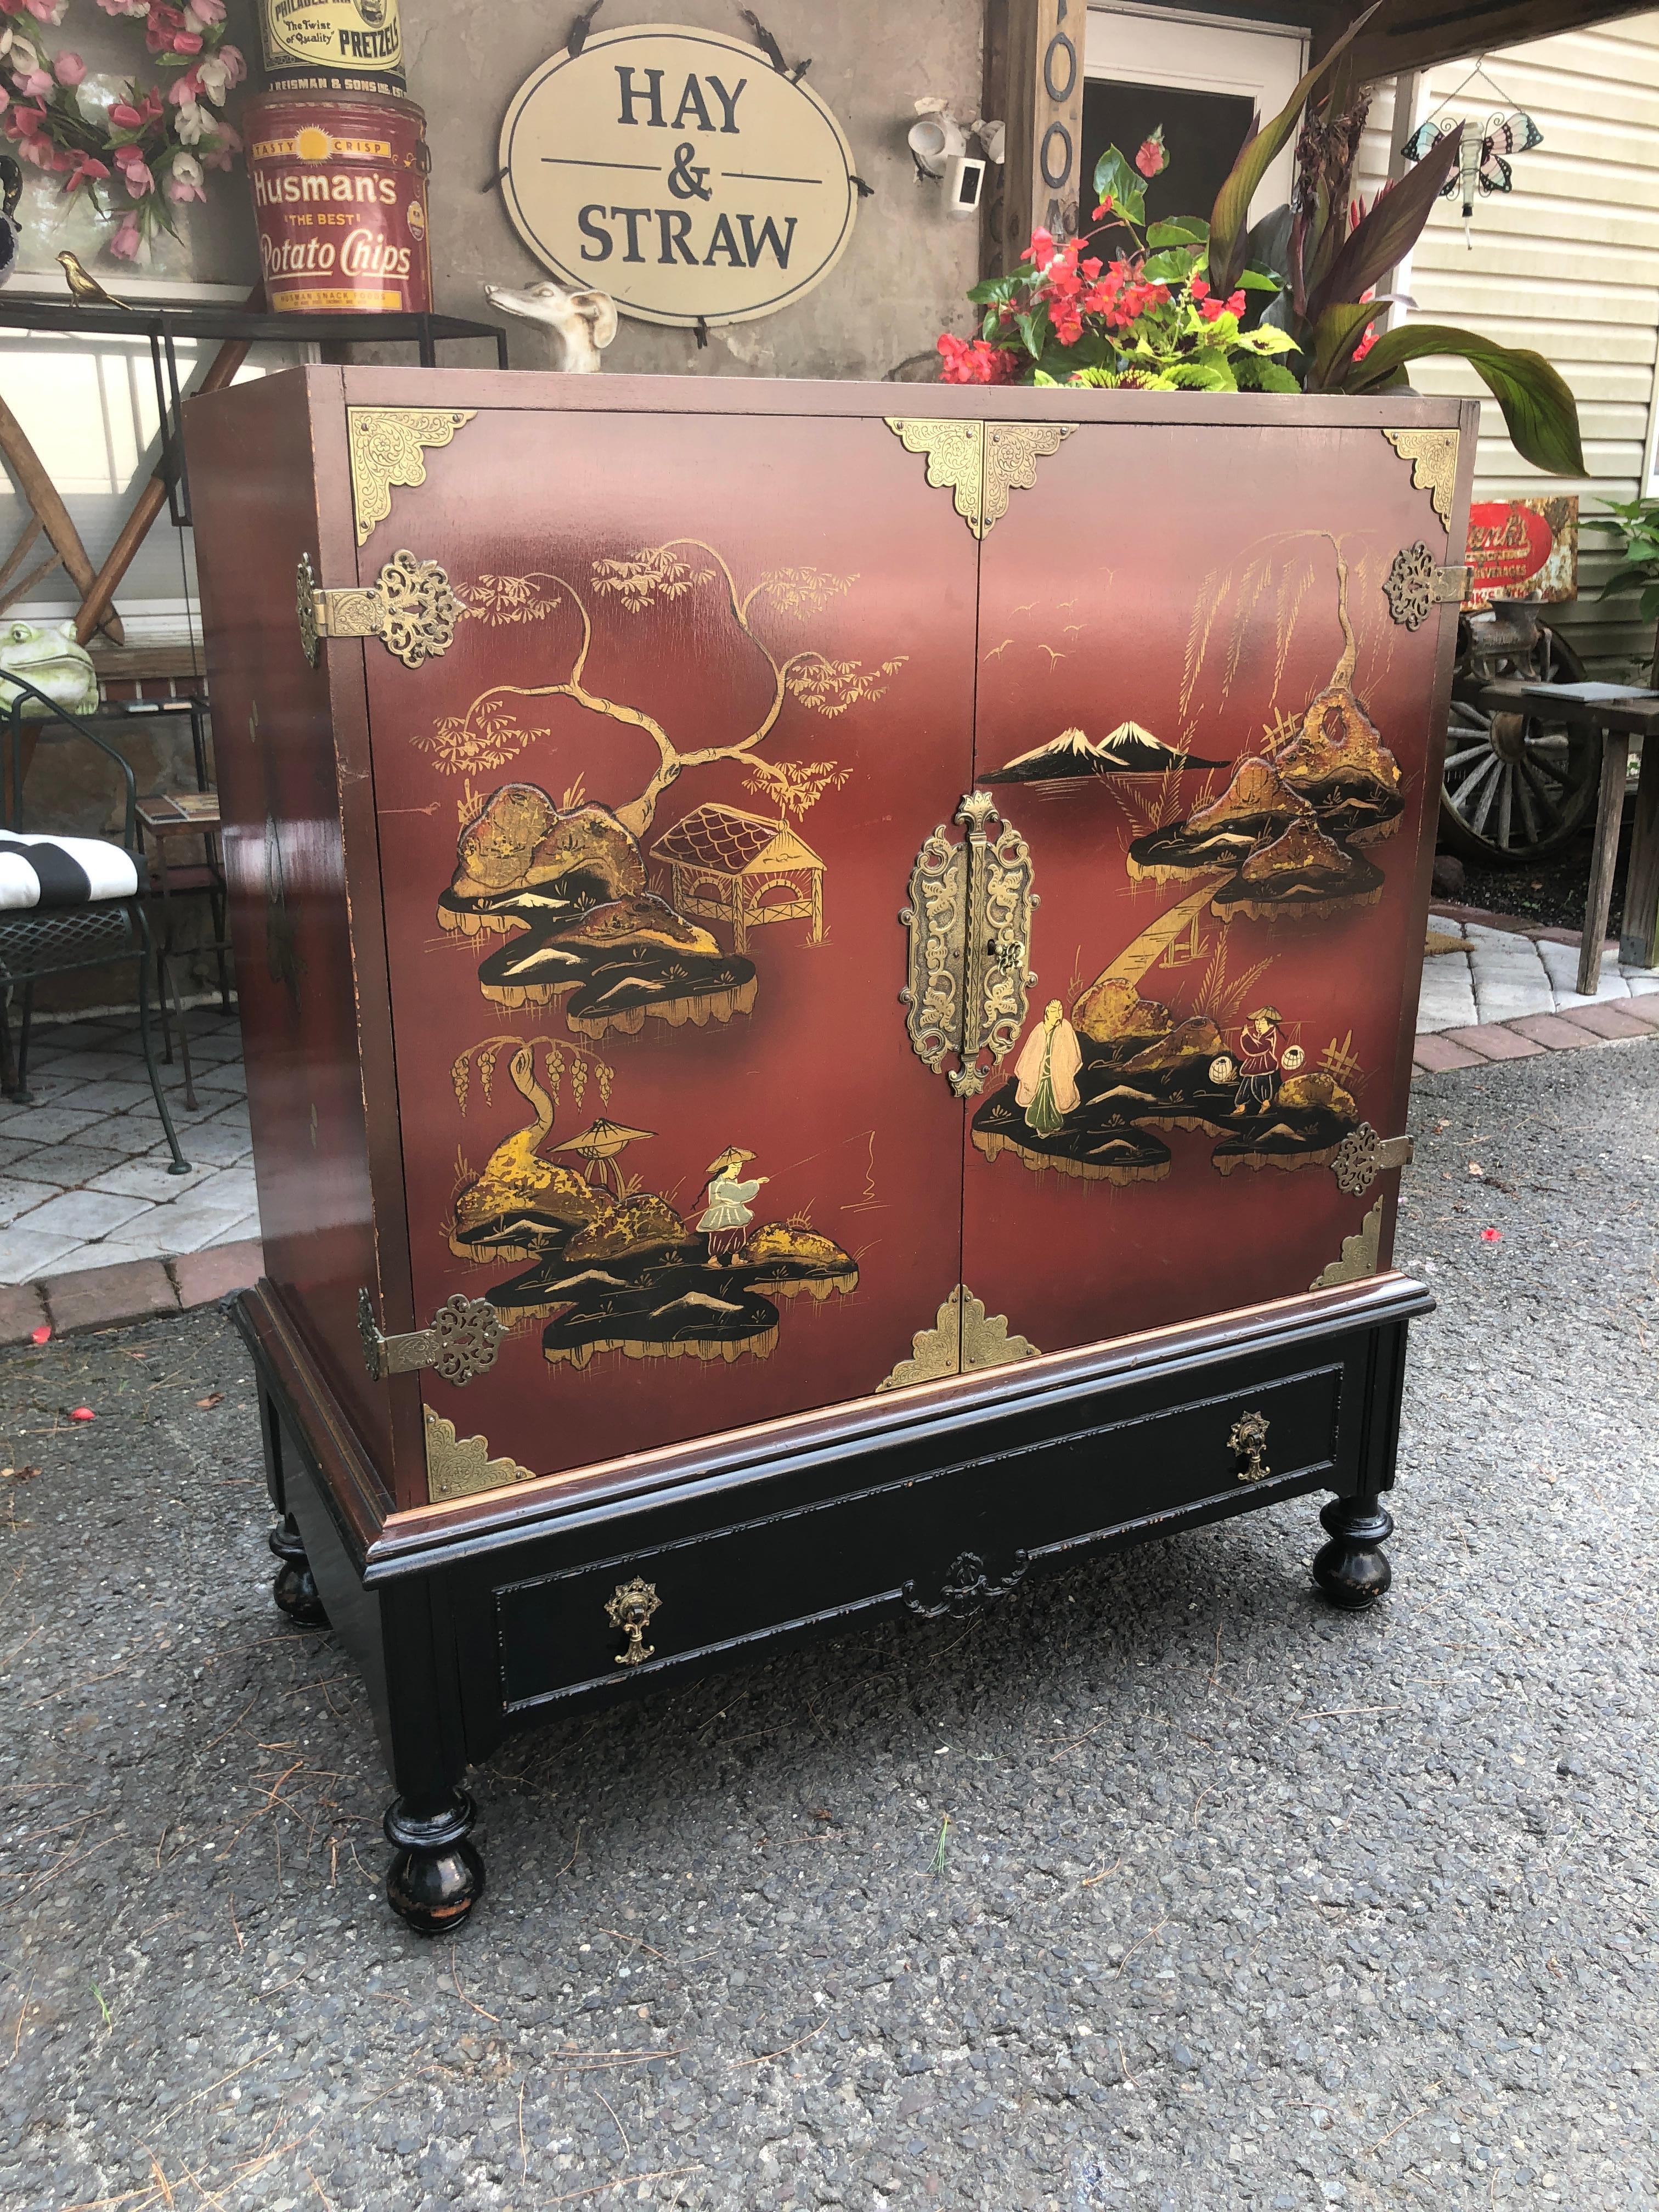 Fabulous Chinoiserie hand painted linen chest or bar cabinet. We love the deep red lacquer finish with the hand painted landscape scenery. We also love the pierced solid brass hardware along with the original fancy key. The inside has 2 adjustable